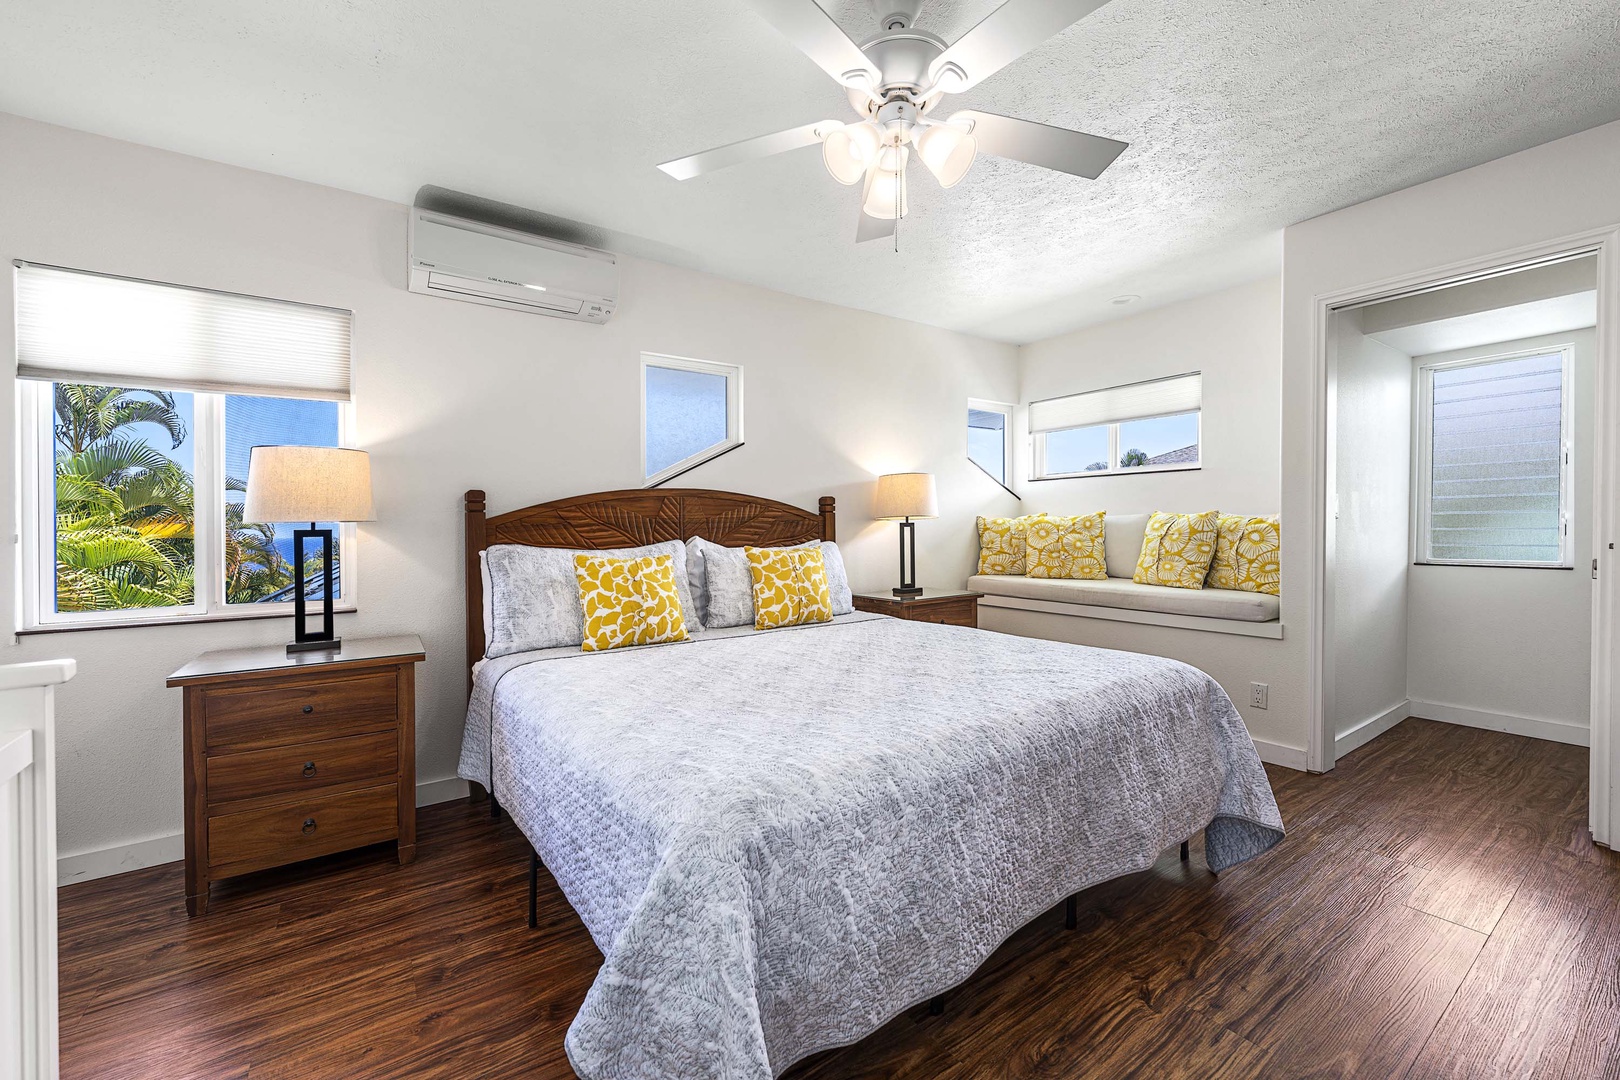 Kailua-Kona Vacation Rentals, Honu Hale - Upstairs Junior Primary equipped with King bed and A/C